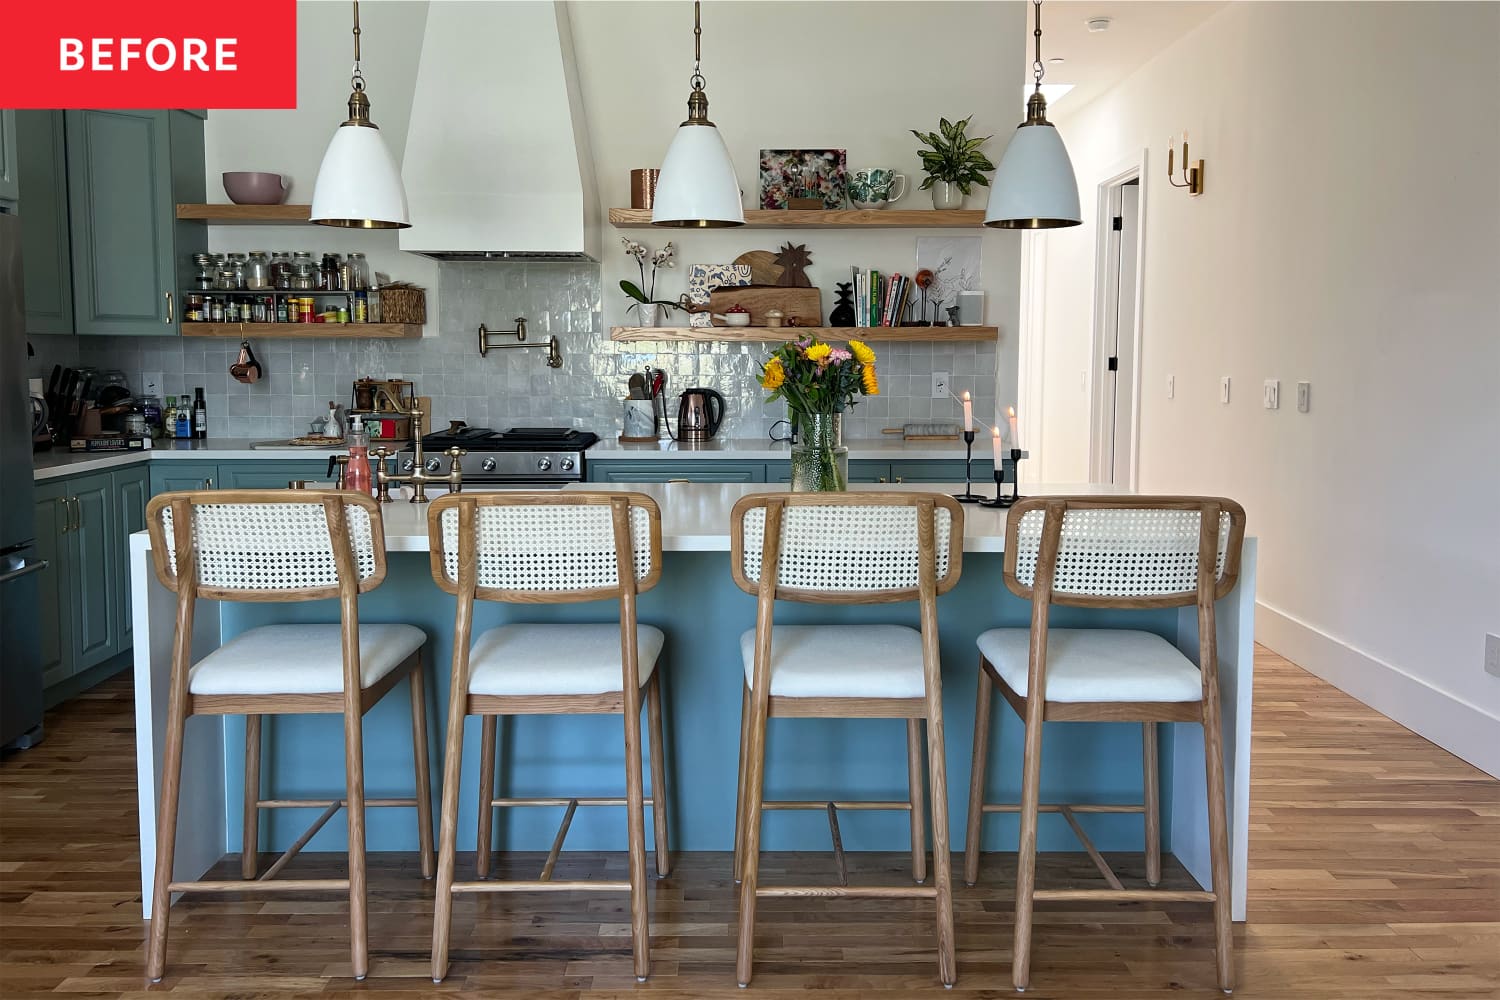 This Kitchen Makeover Features a “Very Risky” Cabinet Color (It Paid Off!)